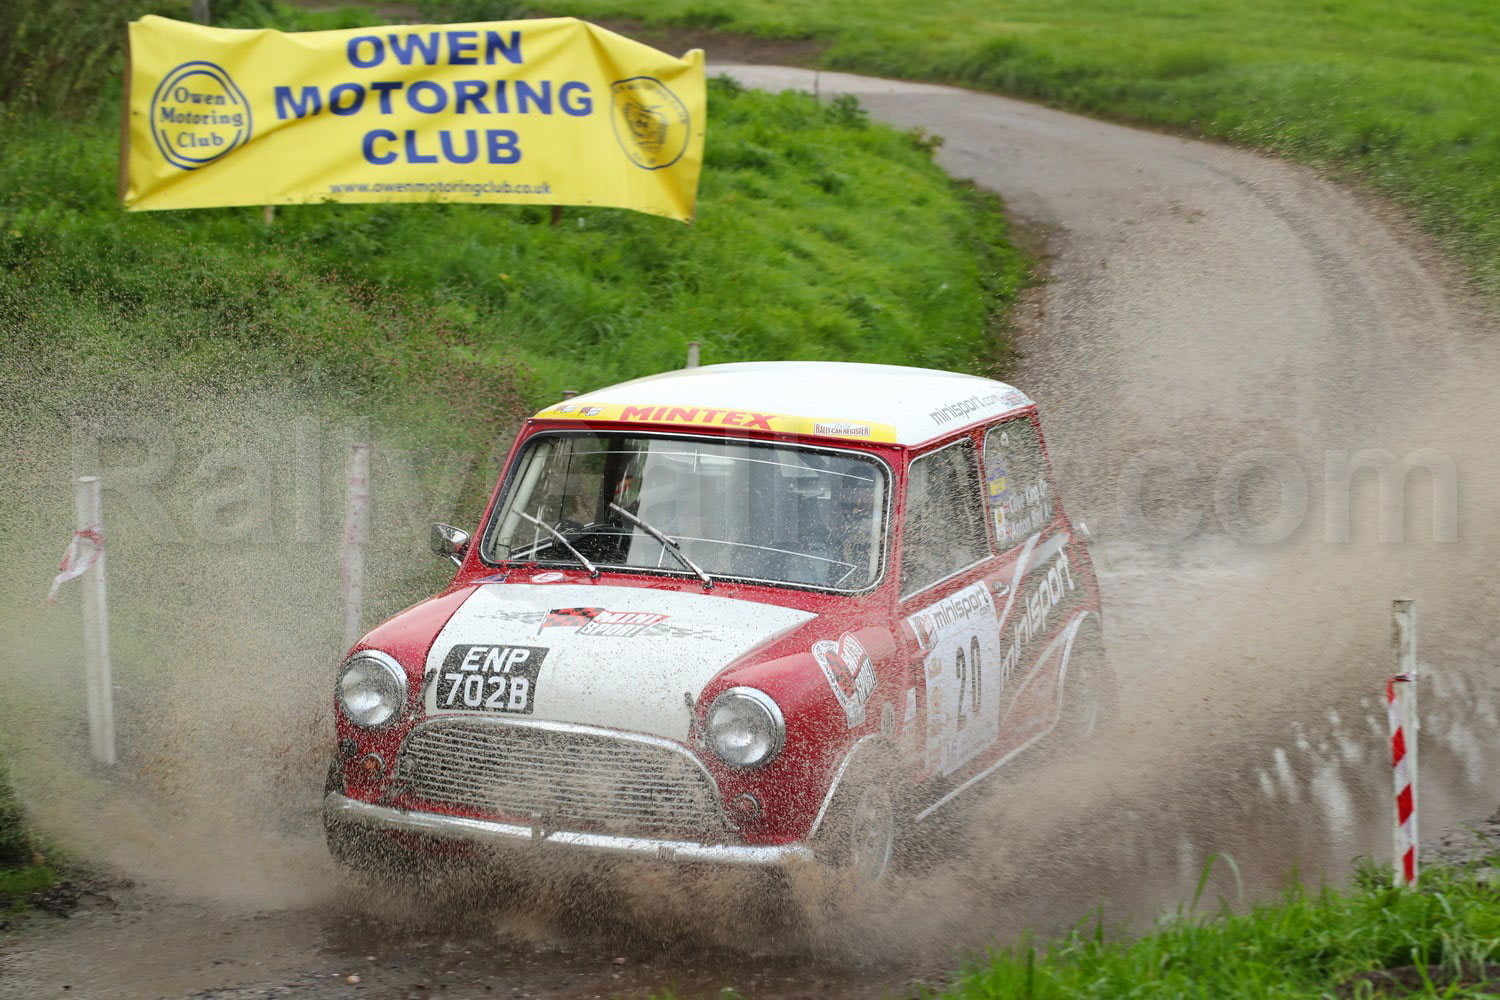 Team Mini Sport's Clive King Takes on the AGBO Stages!